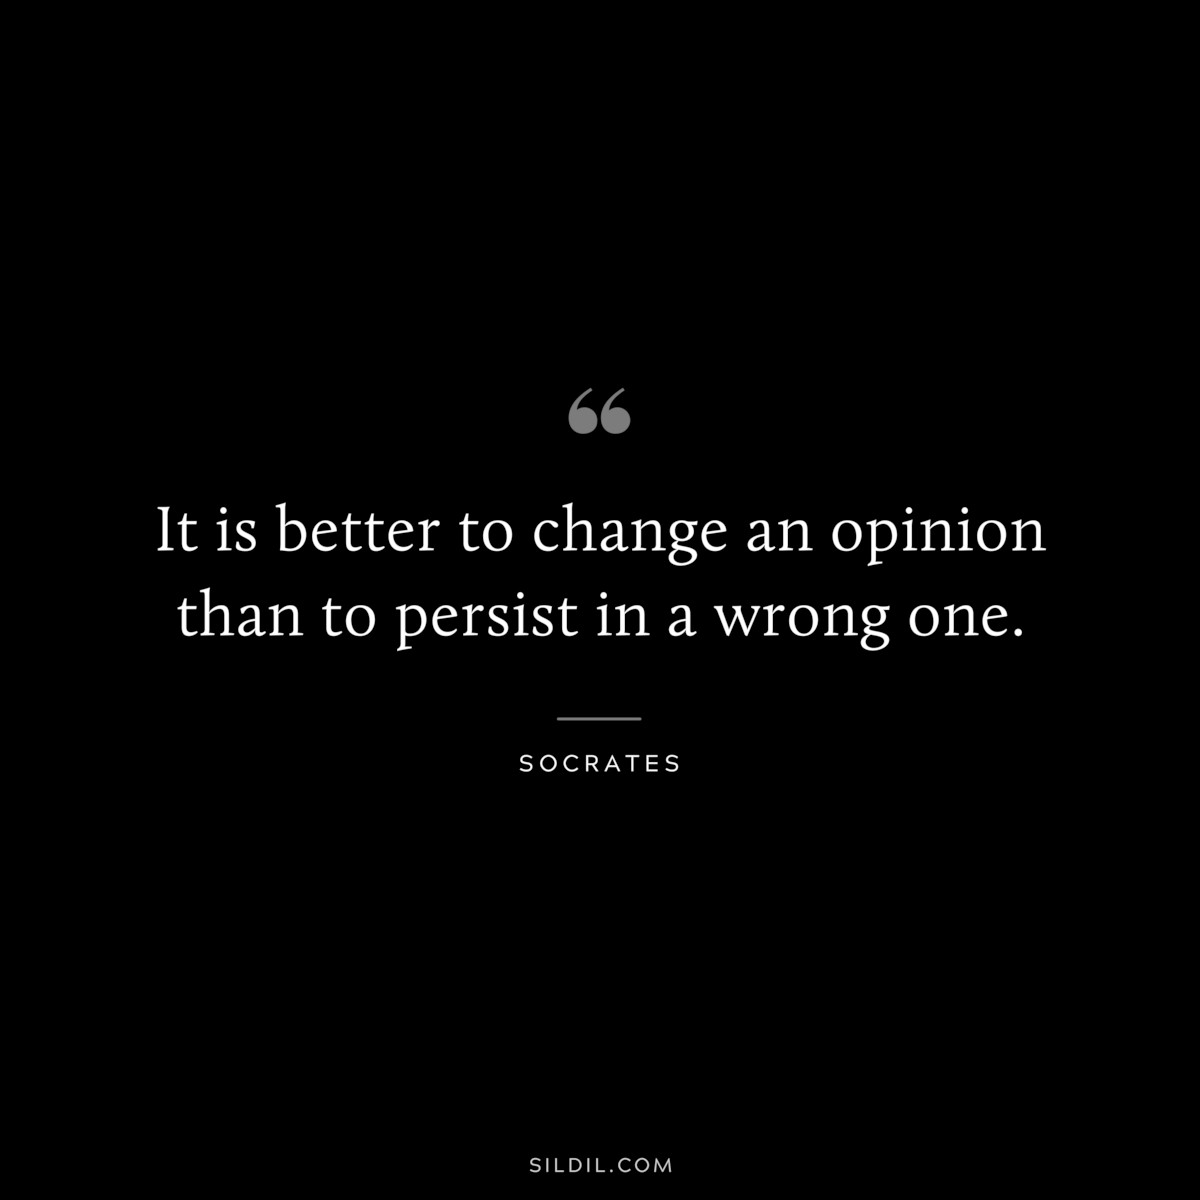 It is better to change an opinion than to persist in a wrong one. ― Socrates